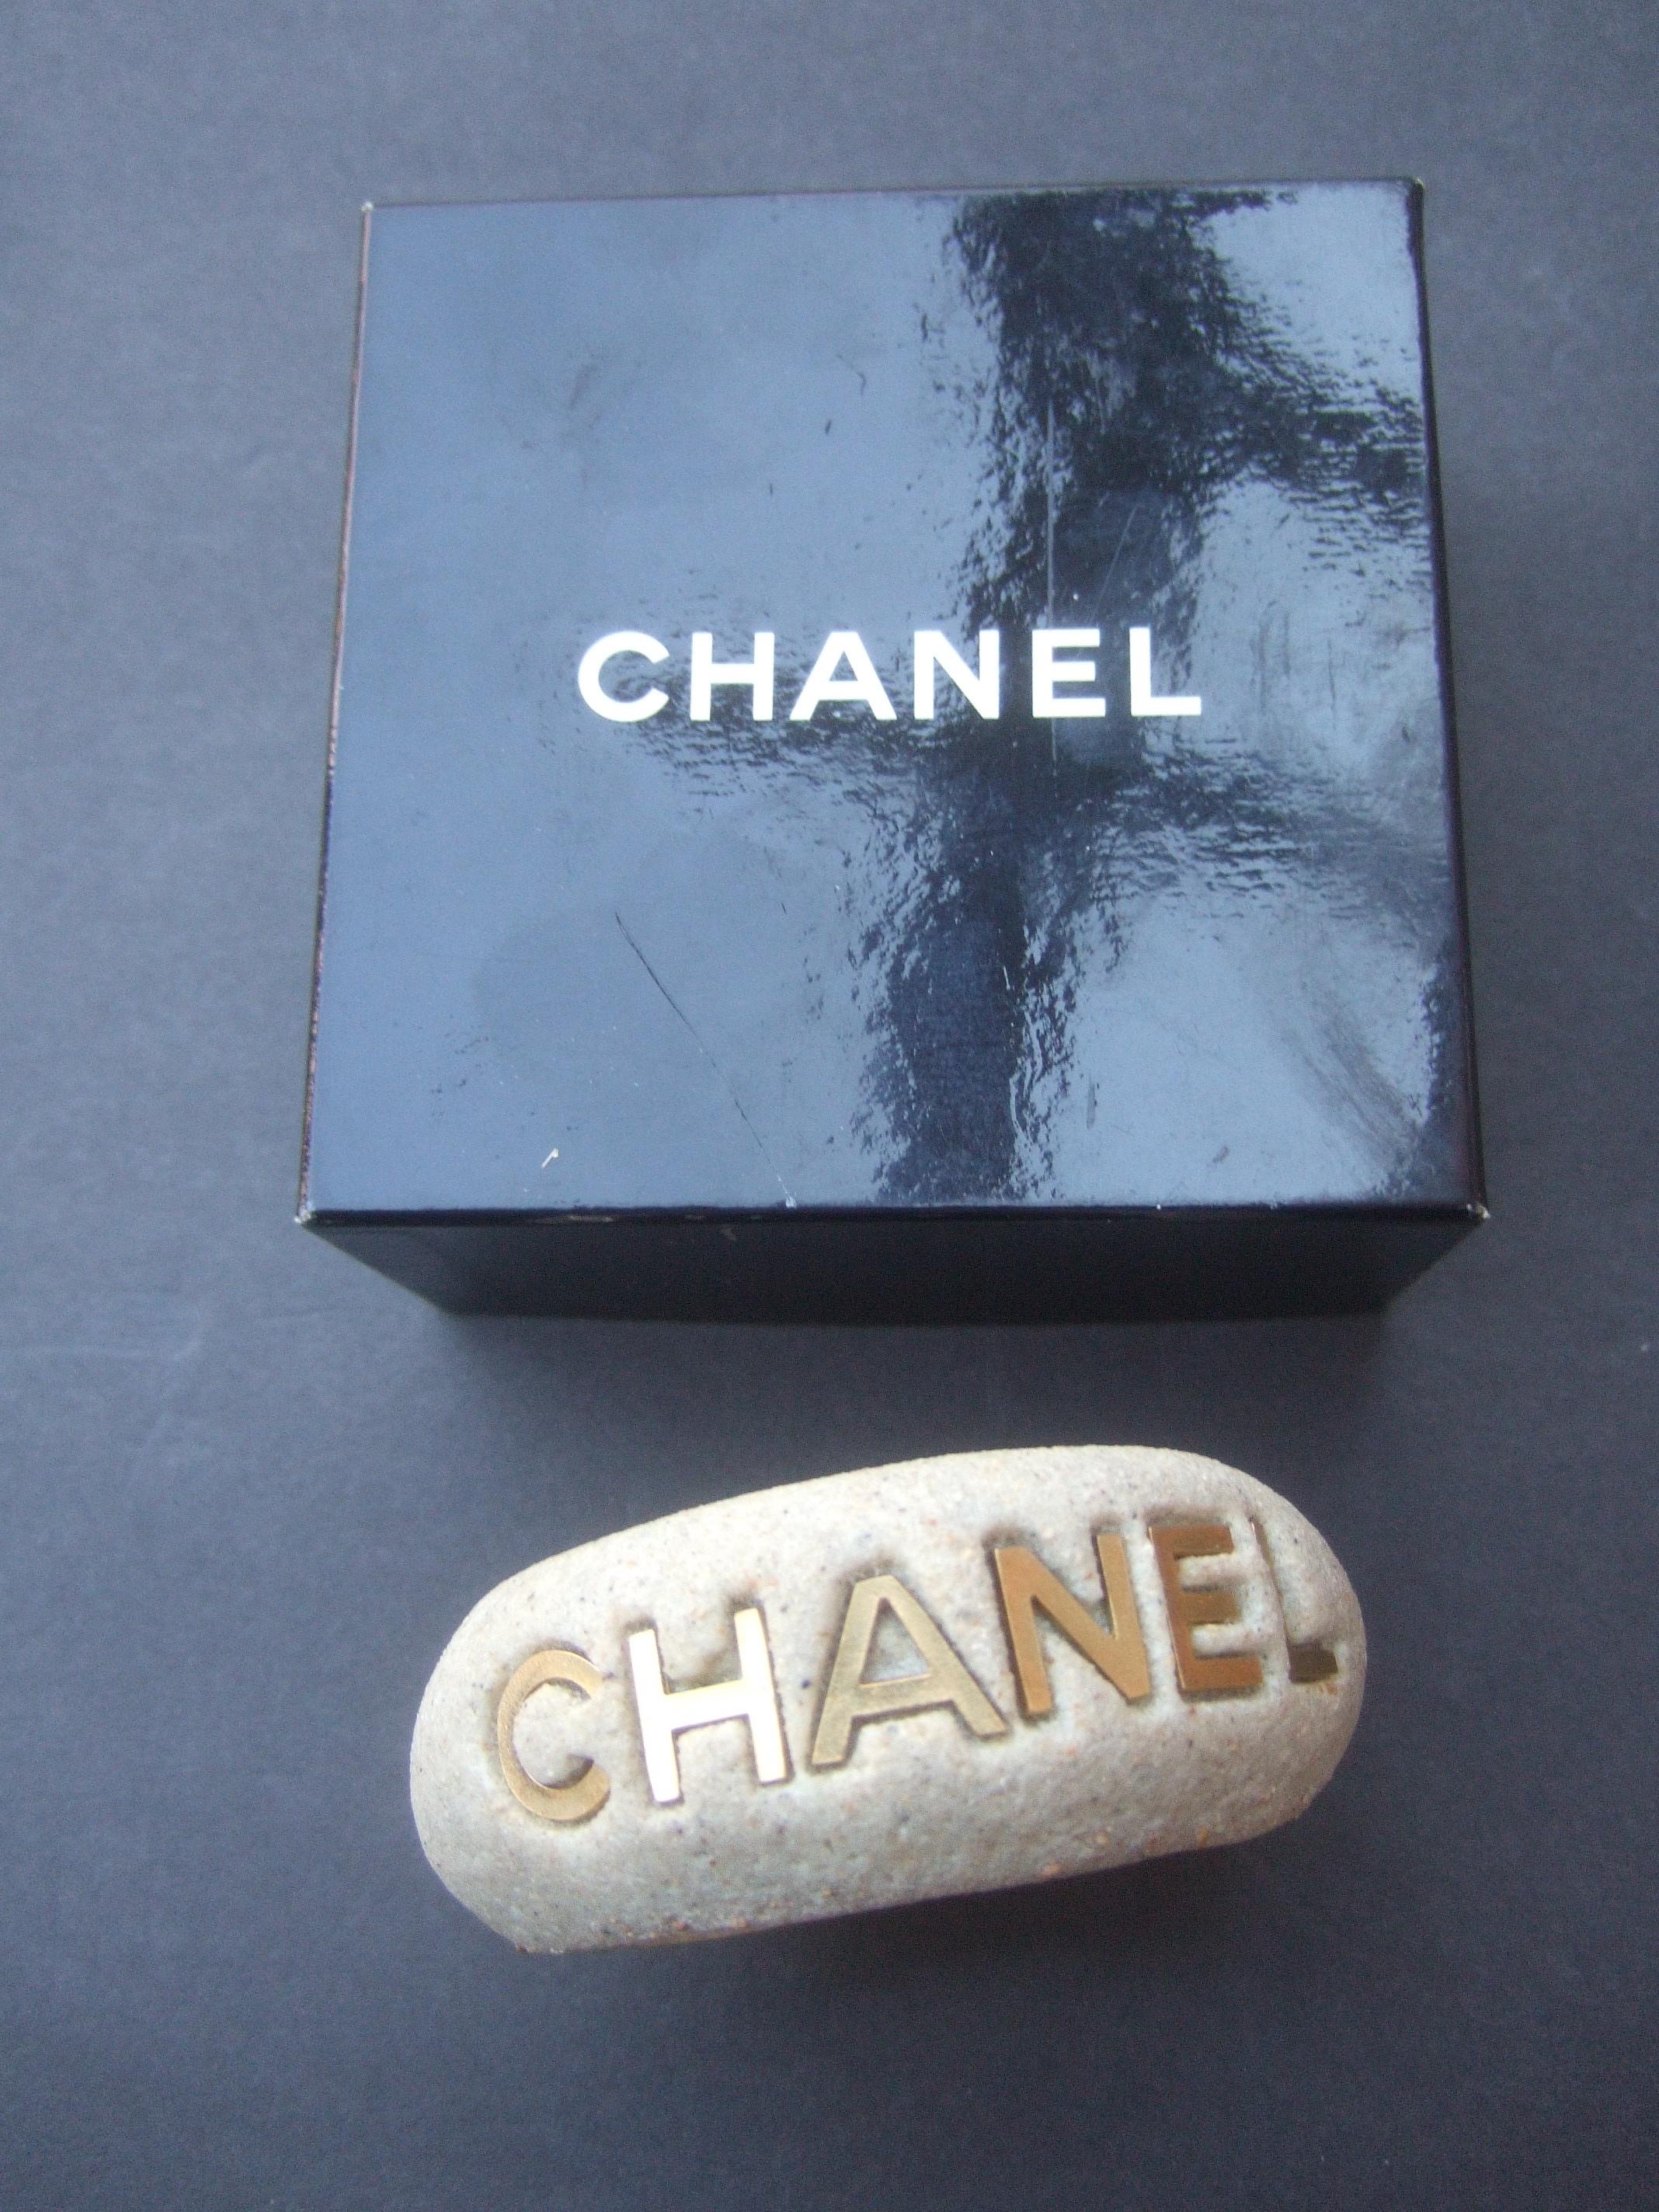 Women's Chanel Wide Molded Bisque Stone Cuff Bracelet in Chanel Presentation Box c 1990s For Sale